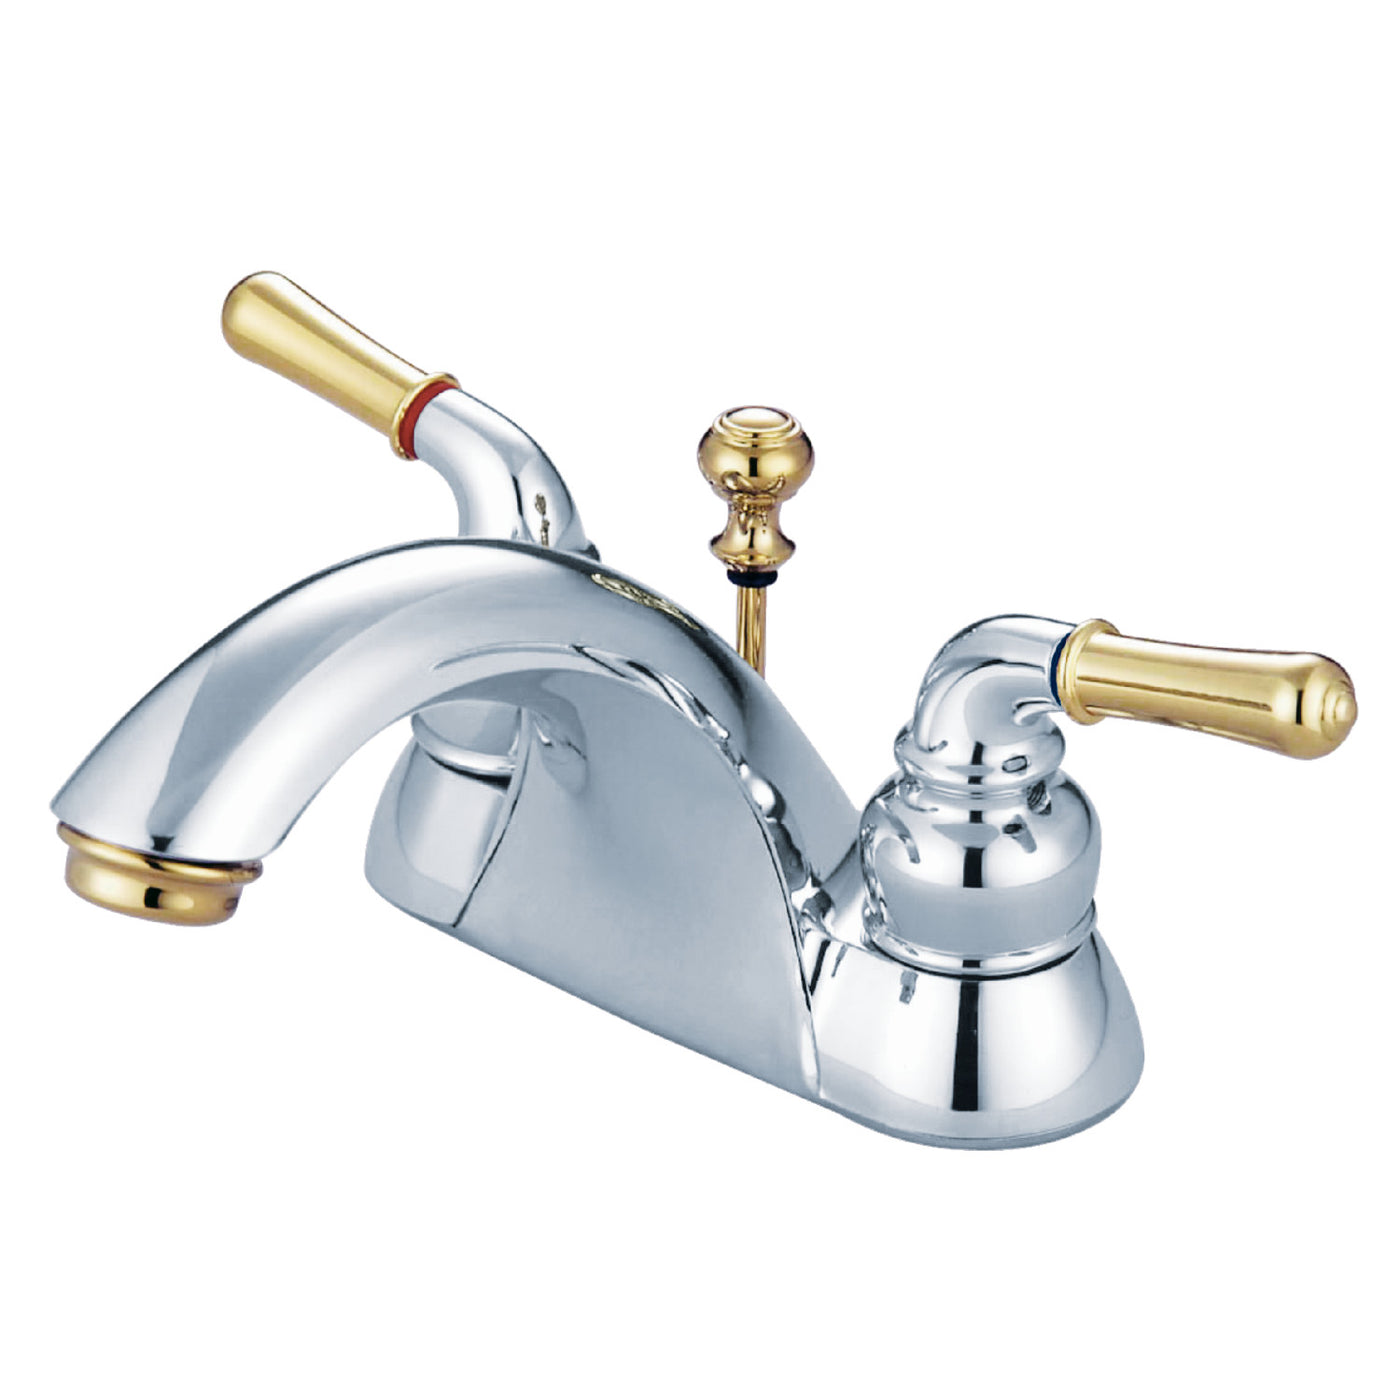 Elements of Design EB2624B 4-Inch Centerset Bathroom Faucet, Polished Chrome/Polished Brass